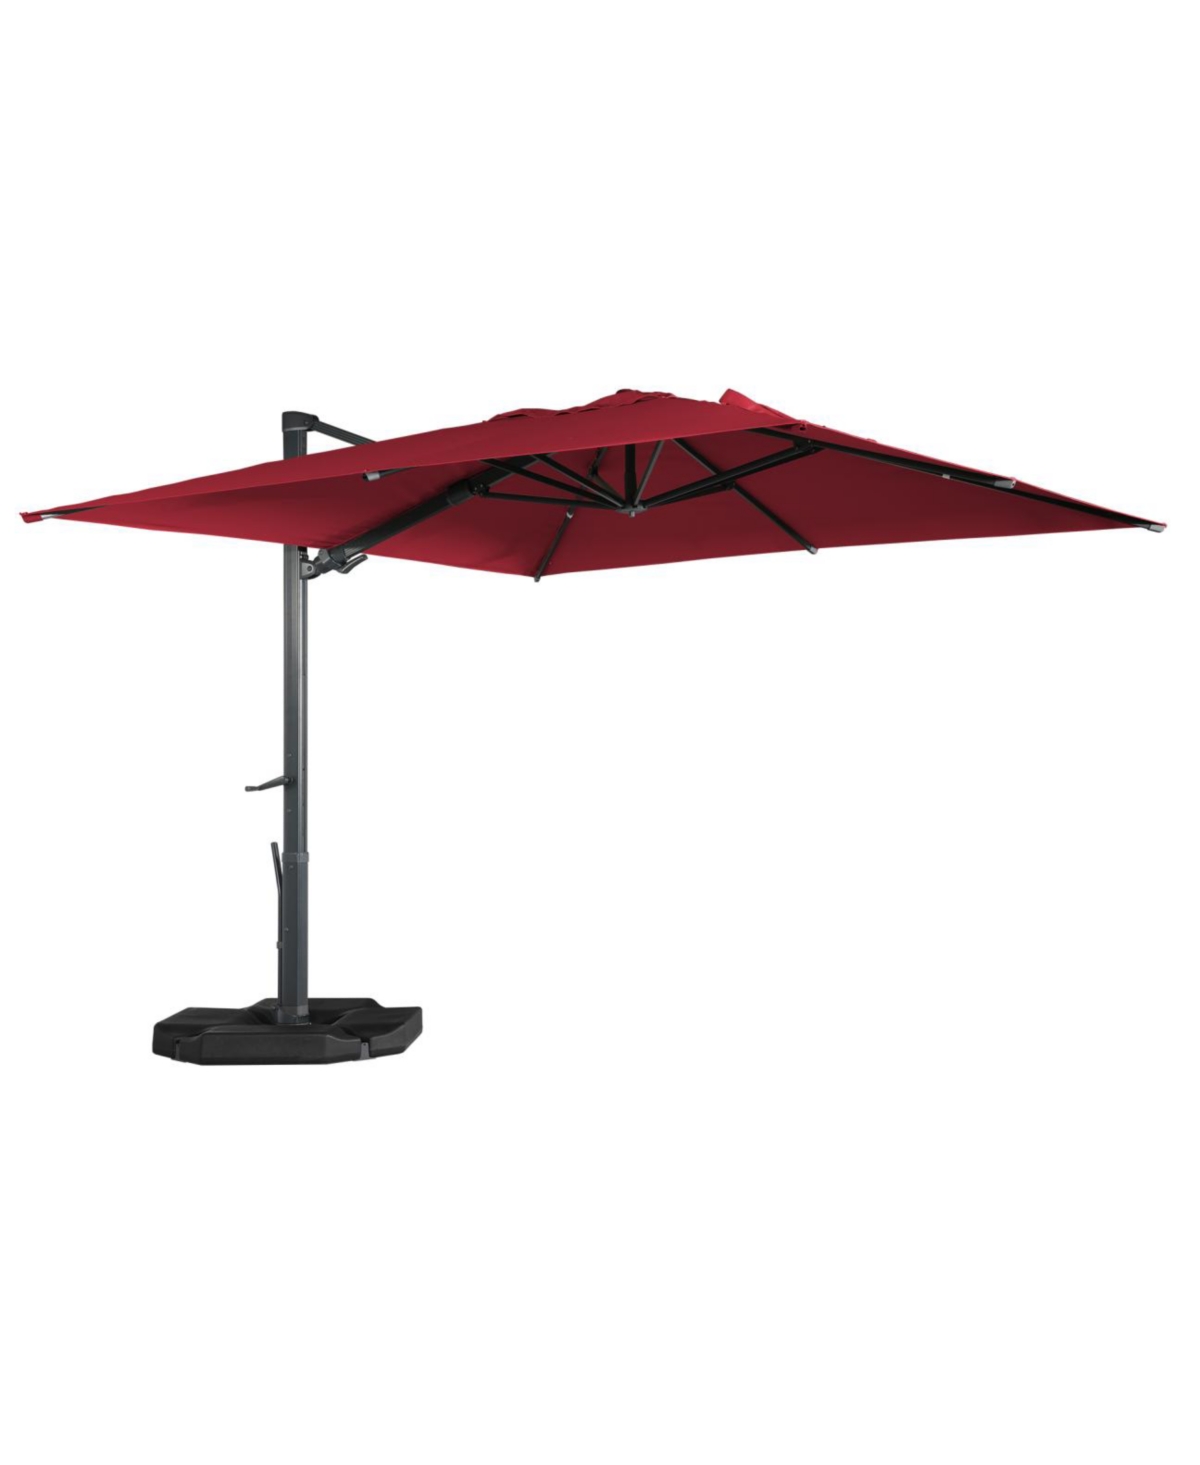 13ft Square Cantilever Patio Umbrella with Tilt for Outdoor Shade - Gray